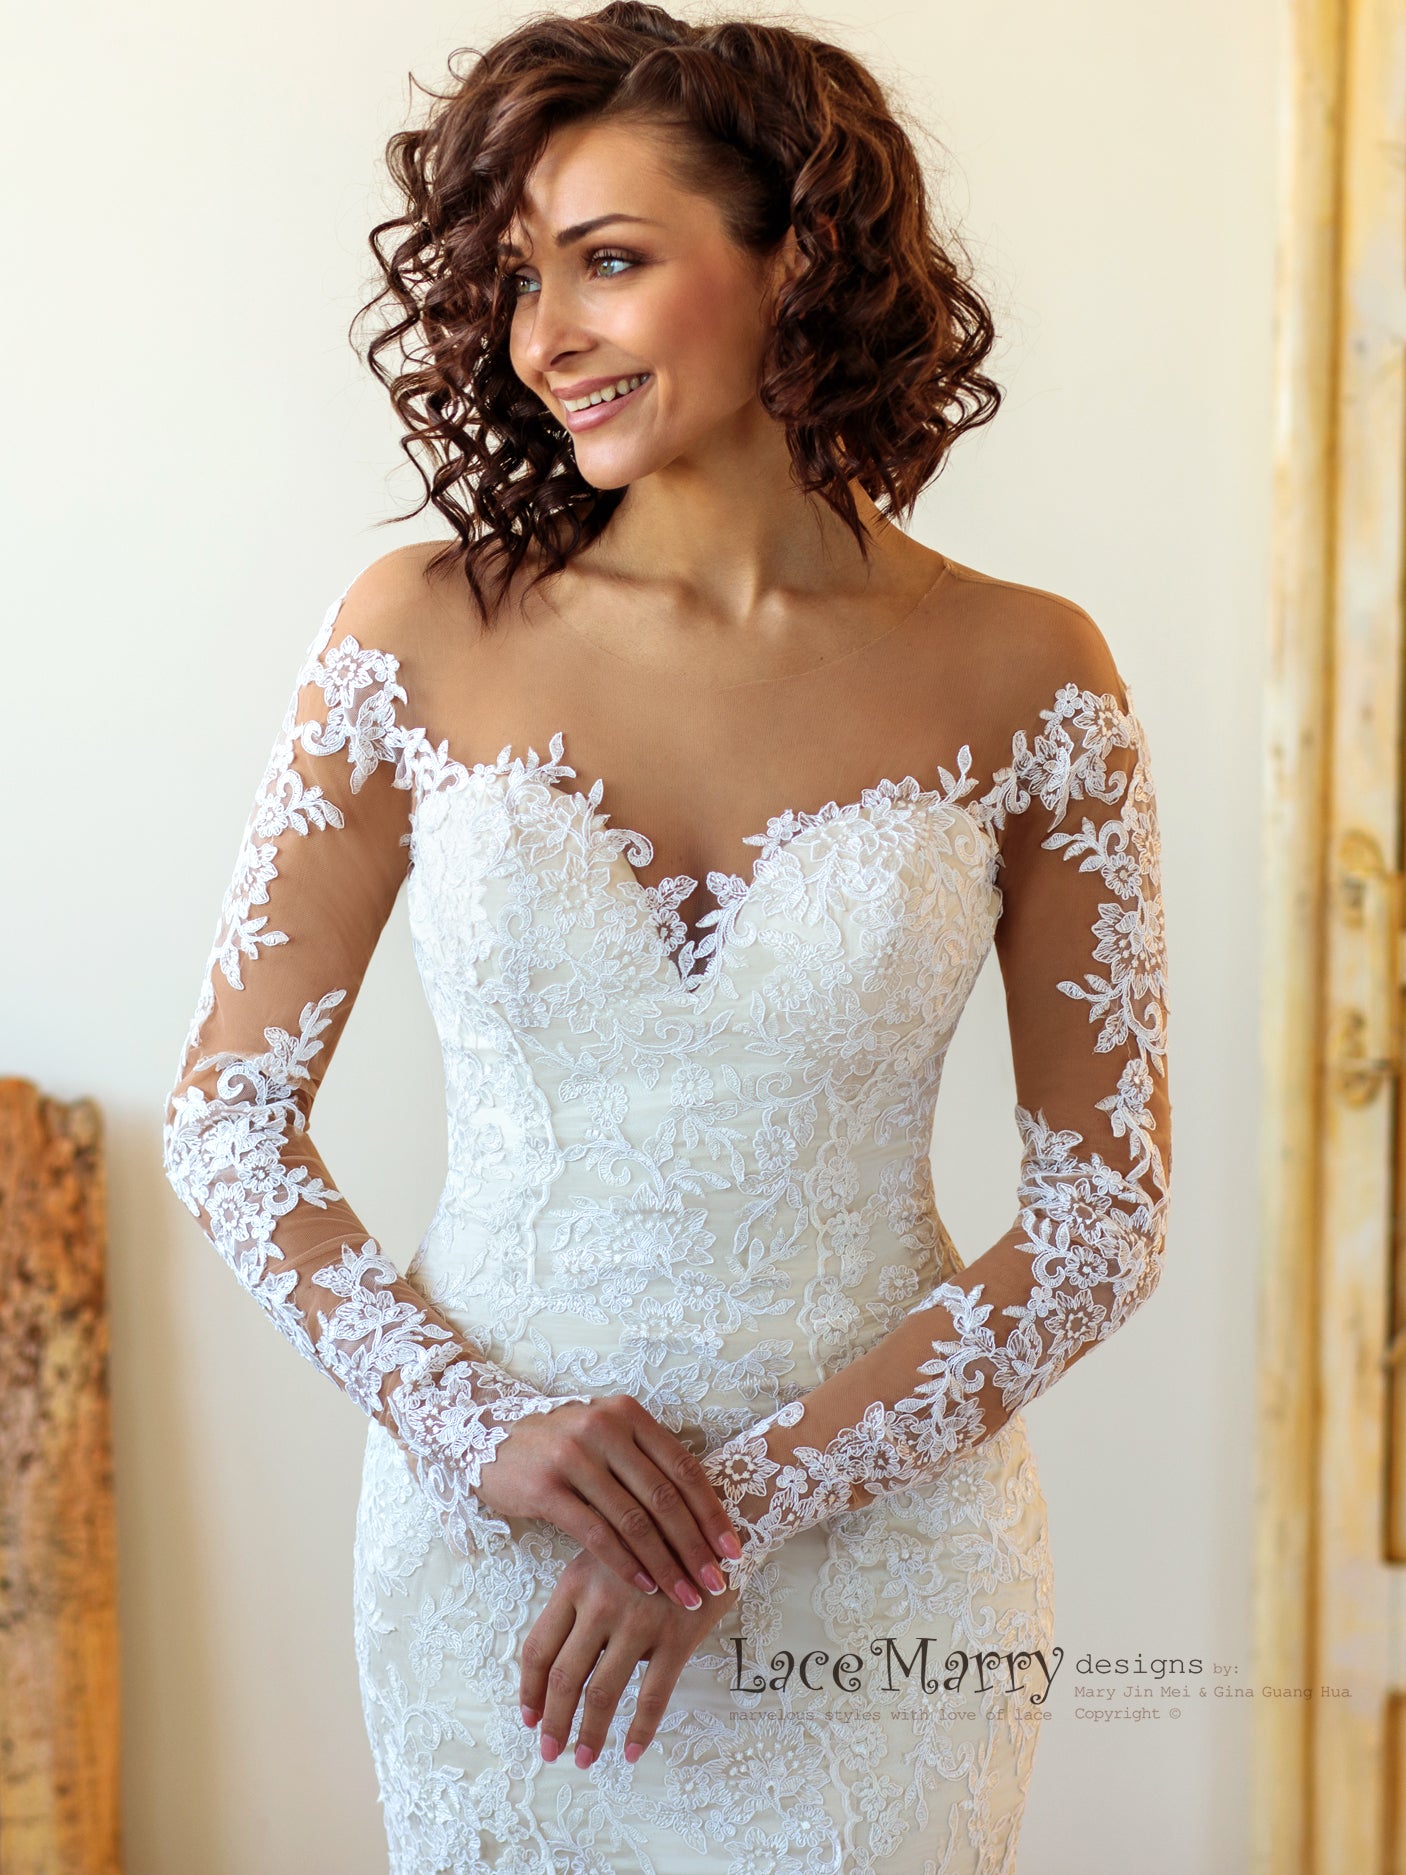 Exquisite Long Lace Sleeves Design Wedding Dress - LaceMarry